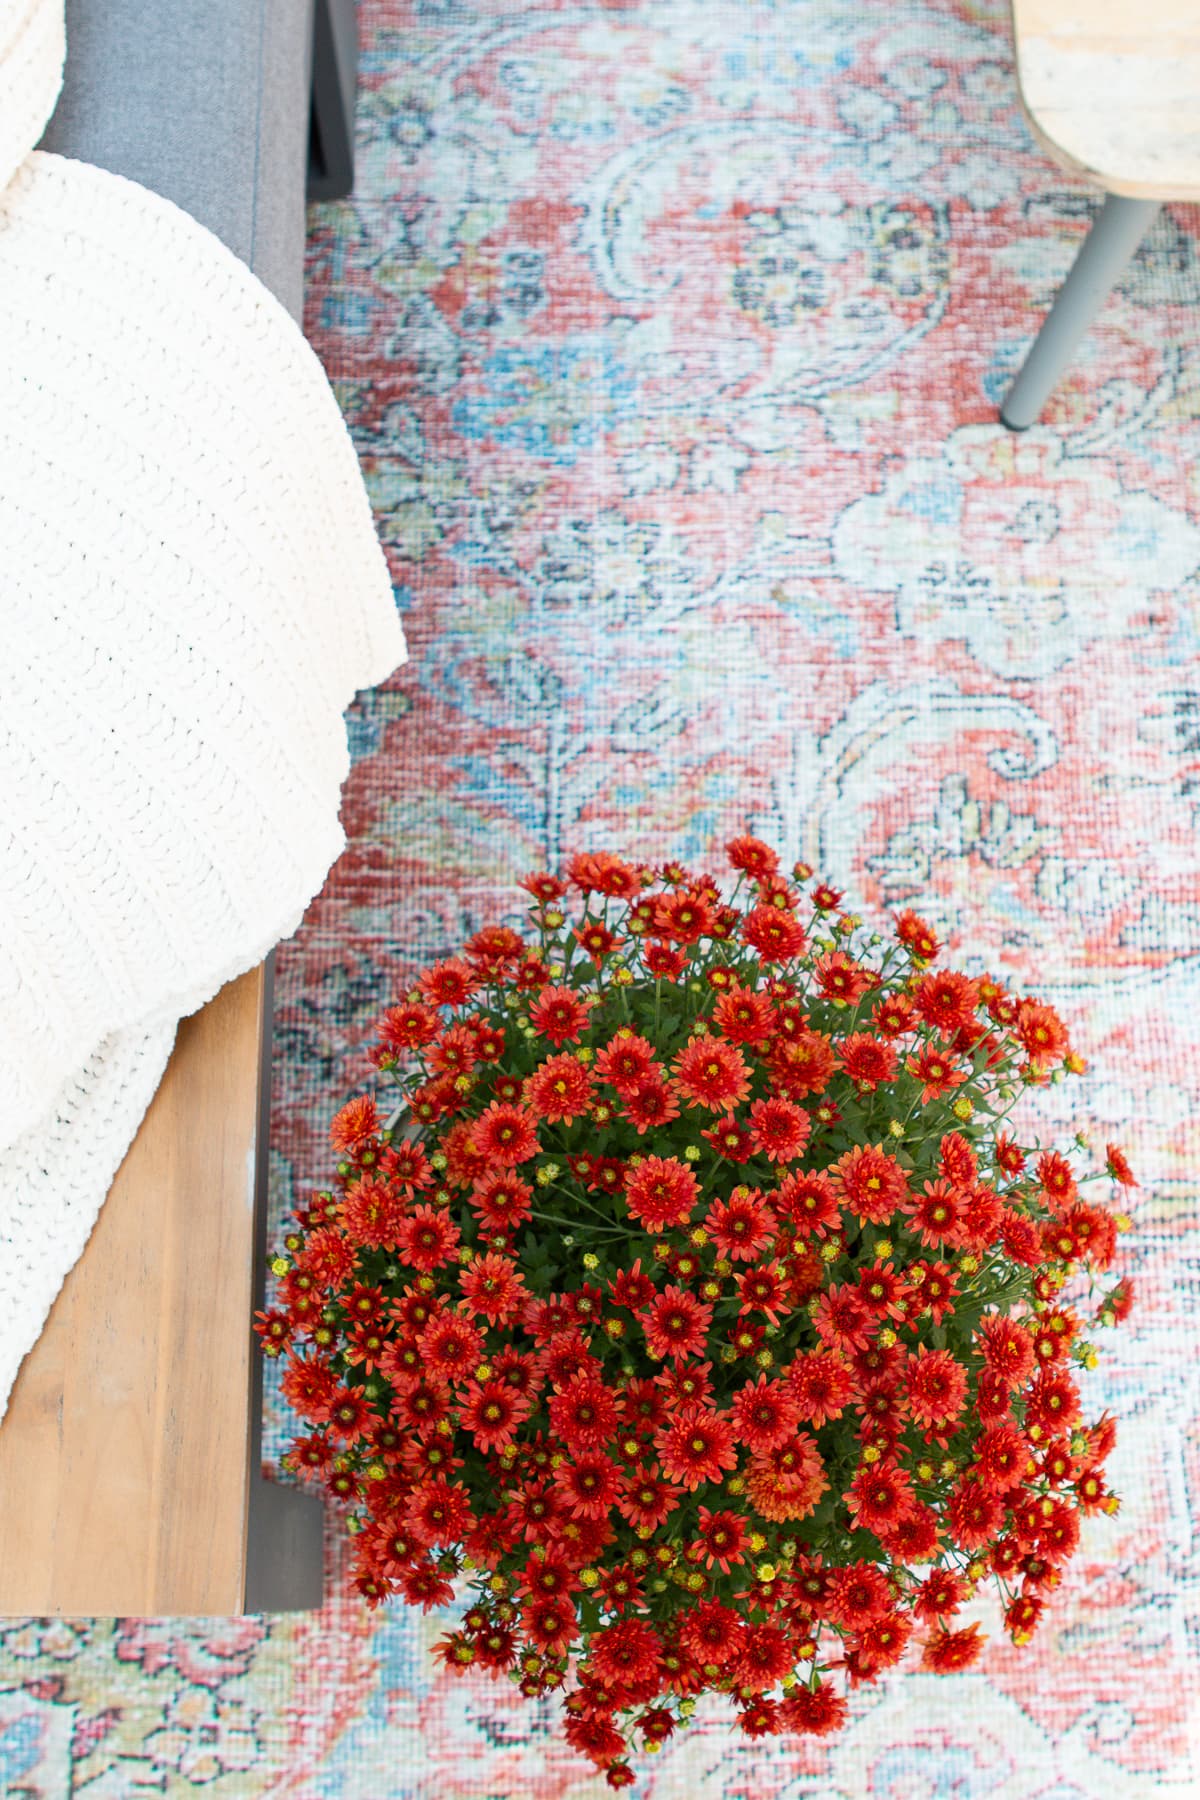 Adding an outdoor rug to our backyard space